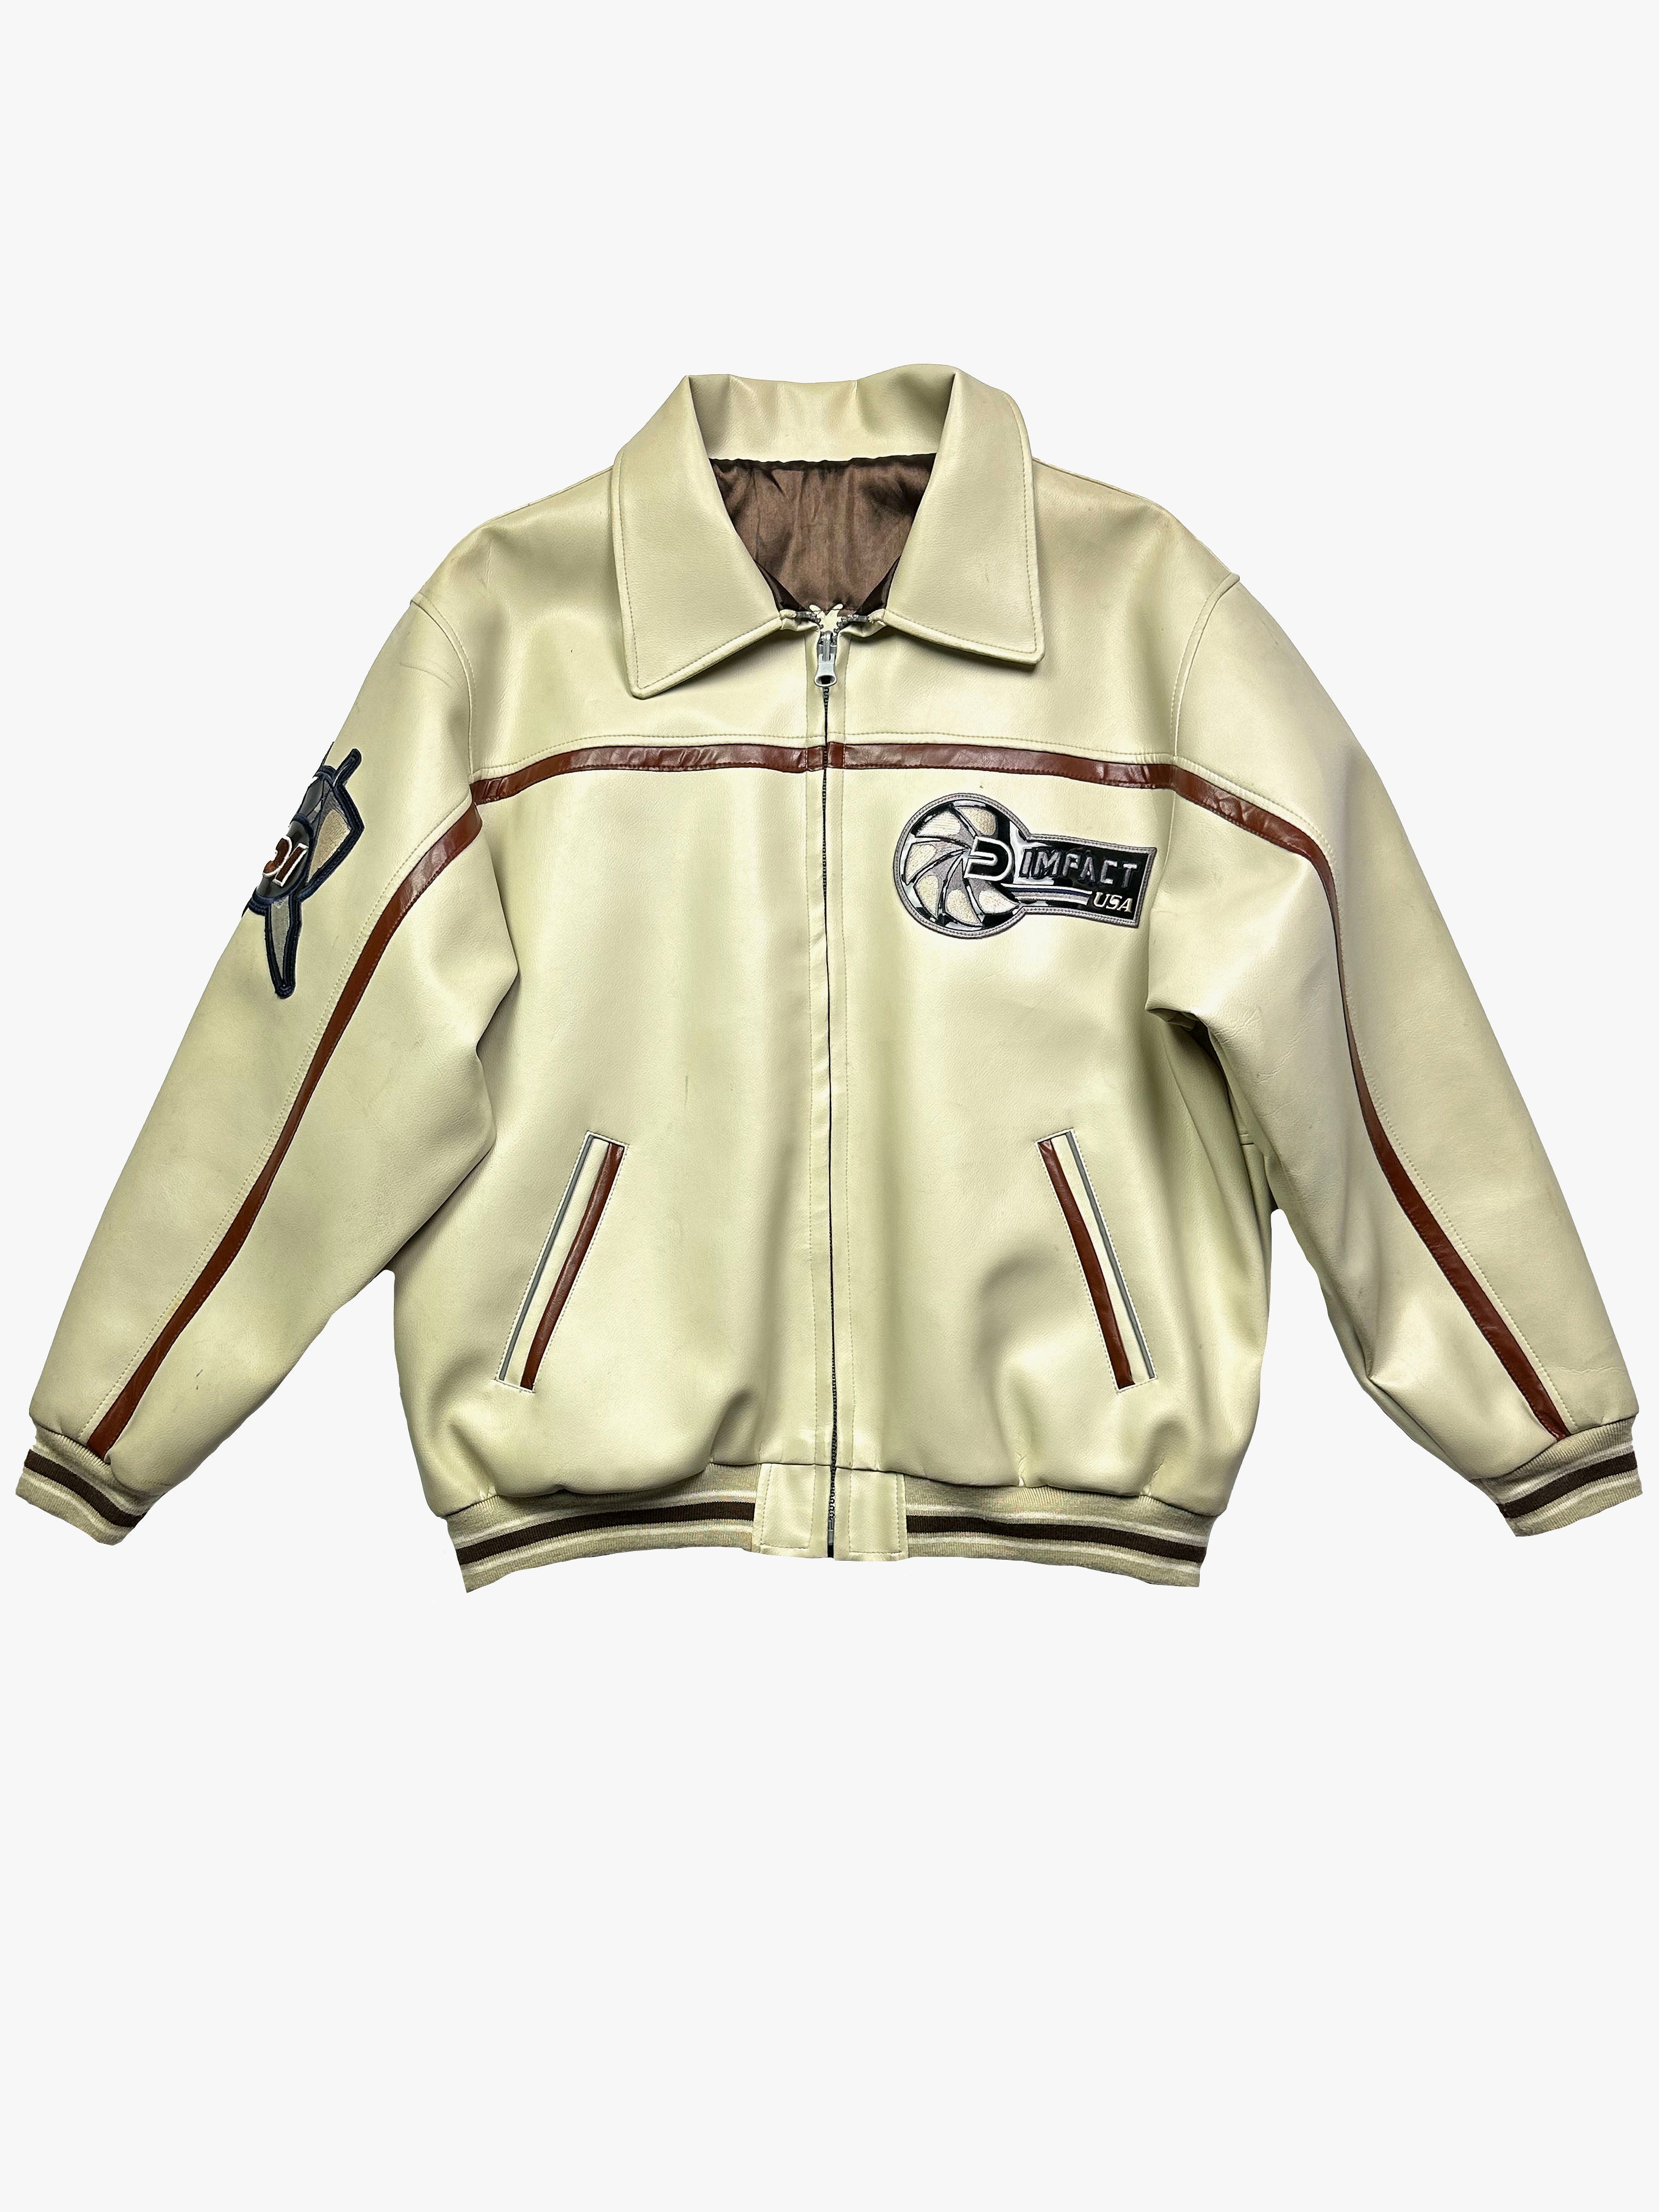 Down Impact Chief Jacket 00's